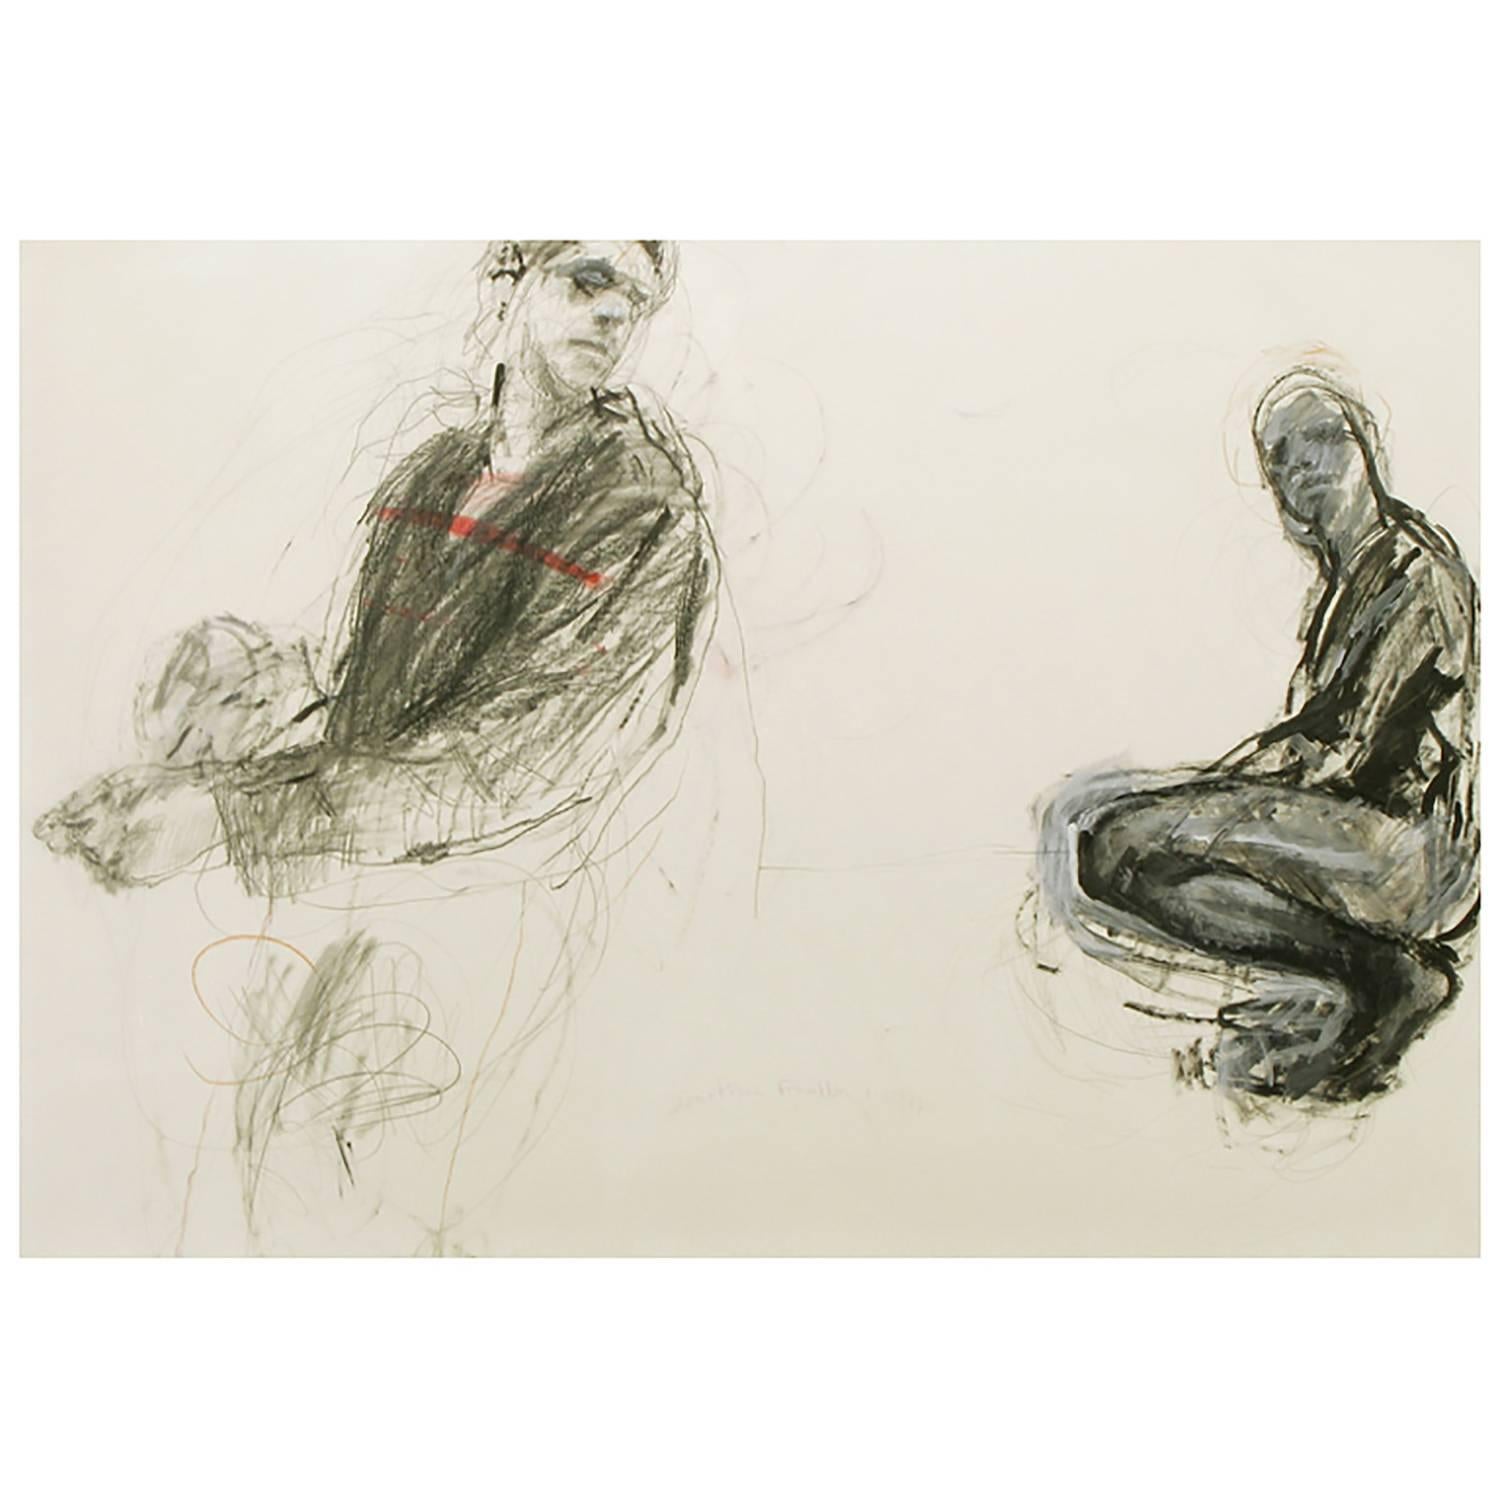 Jonathan Franklin "Whirlwind" Male Figures in Graphite and Acrylic on Paper